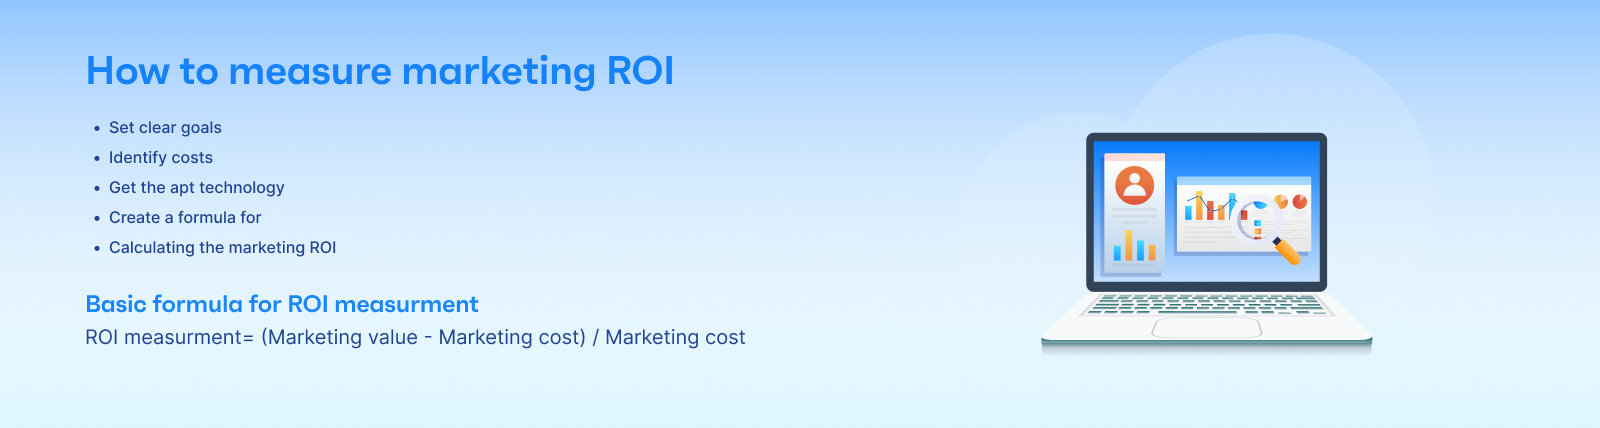 how-to-measure-ROI.png